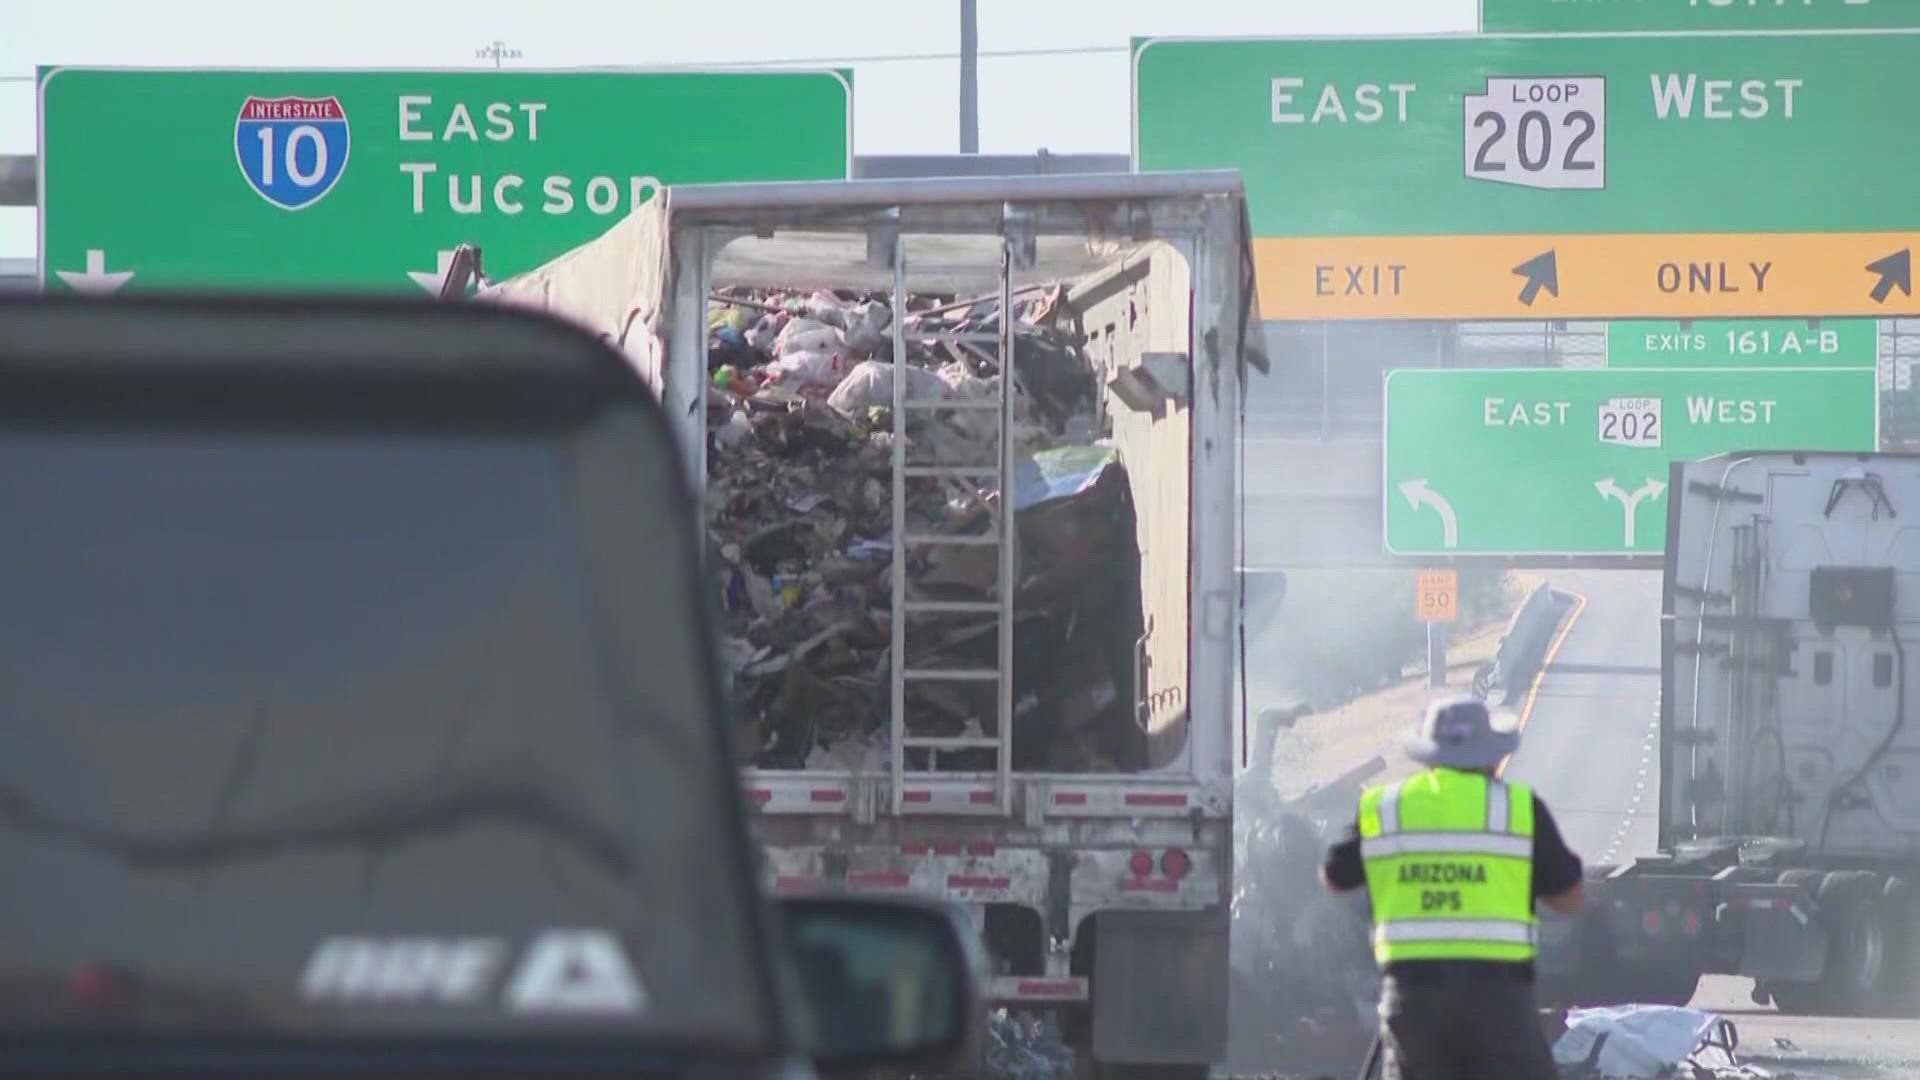 One of the trucks suspected of being at fault in Thursday's deadly, fiery crash on I-10 was owned by a company with multiple safe driver violations and crashes.